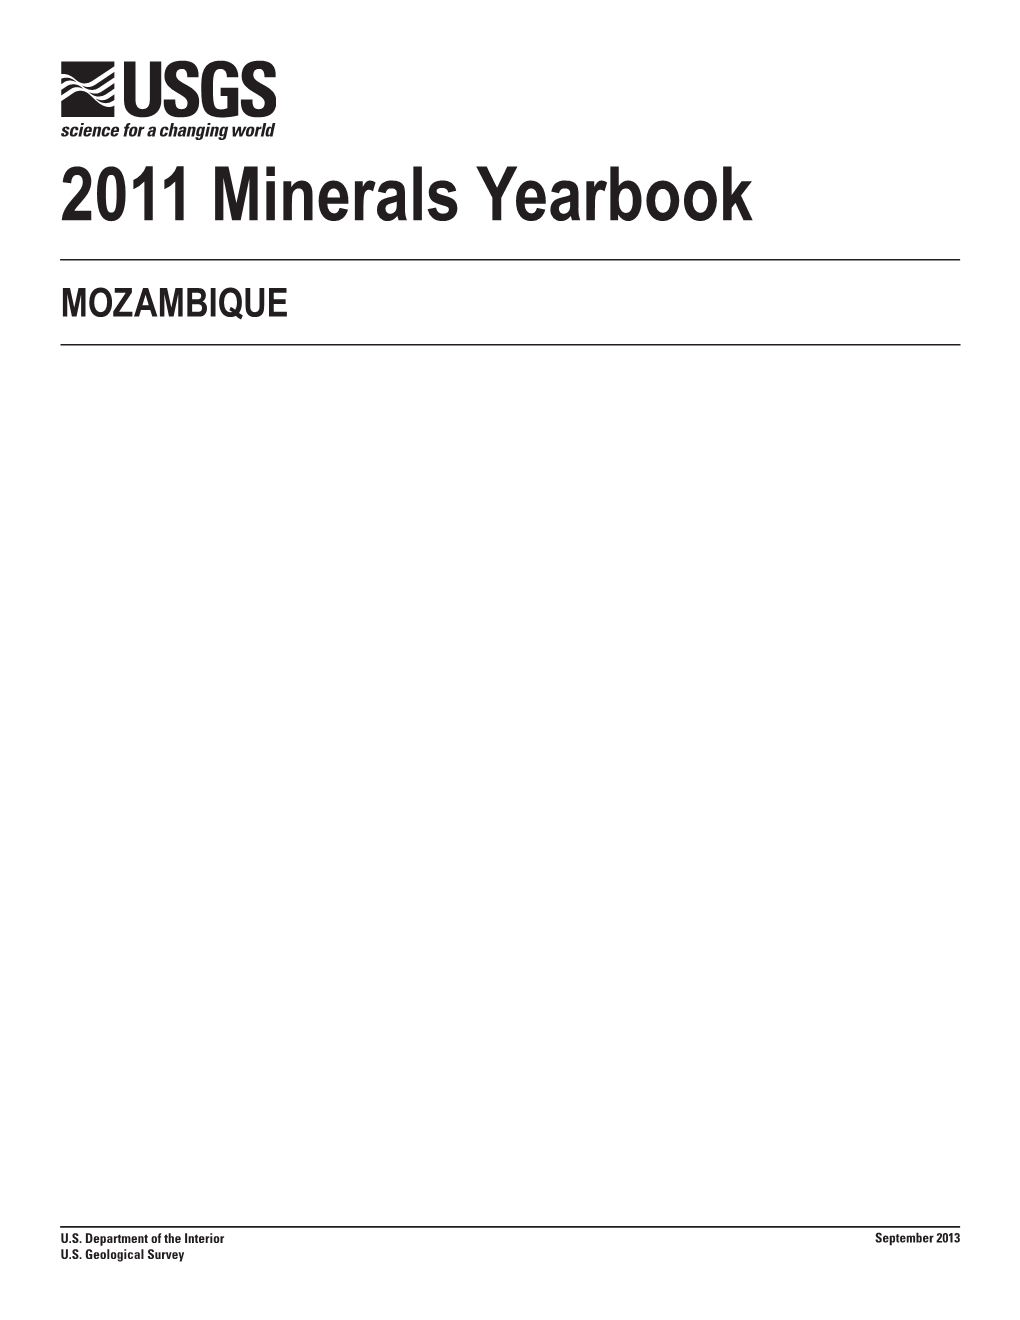 The Mineral Industry of Mozambique in 2011